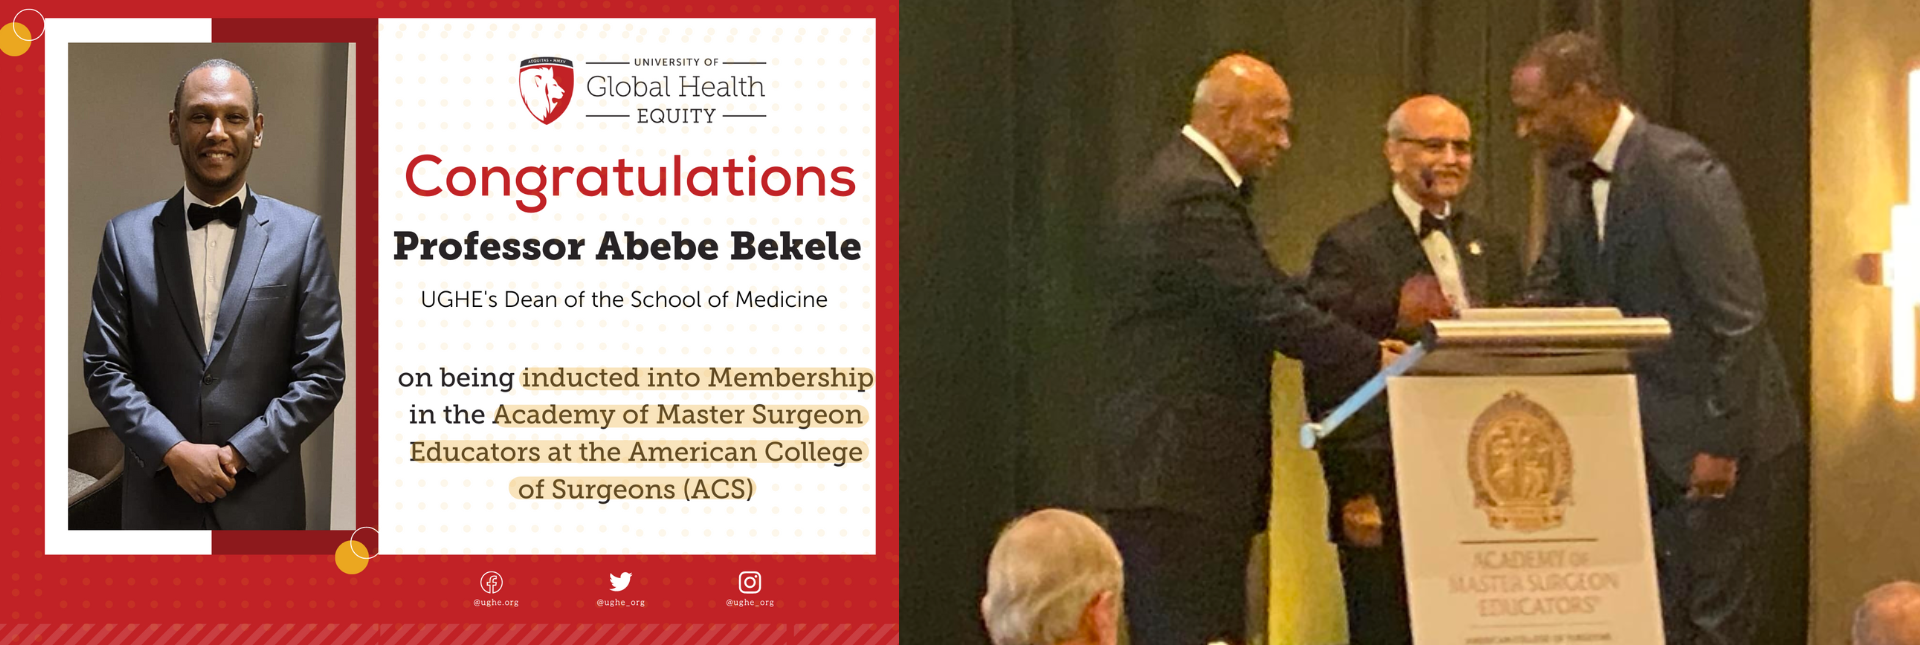 Professor Abebe Bekele, Dean of the School of Medicine at UGHE is admitted into the Academy of Master Surgeon Educators®